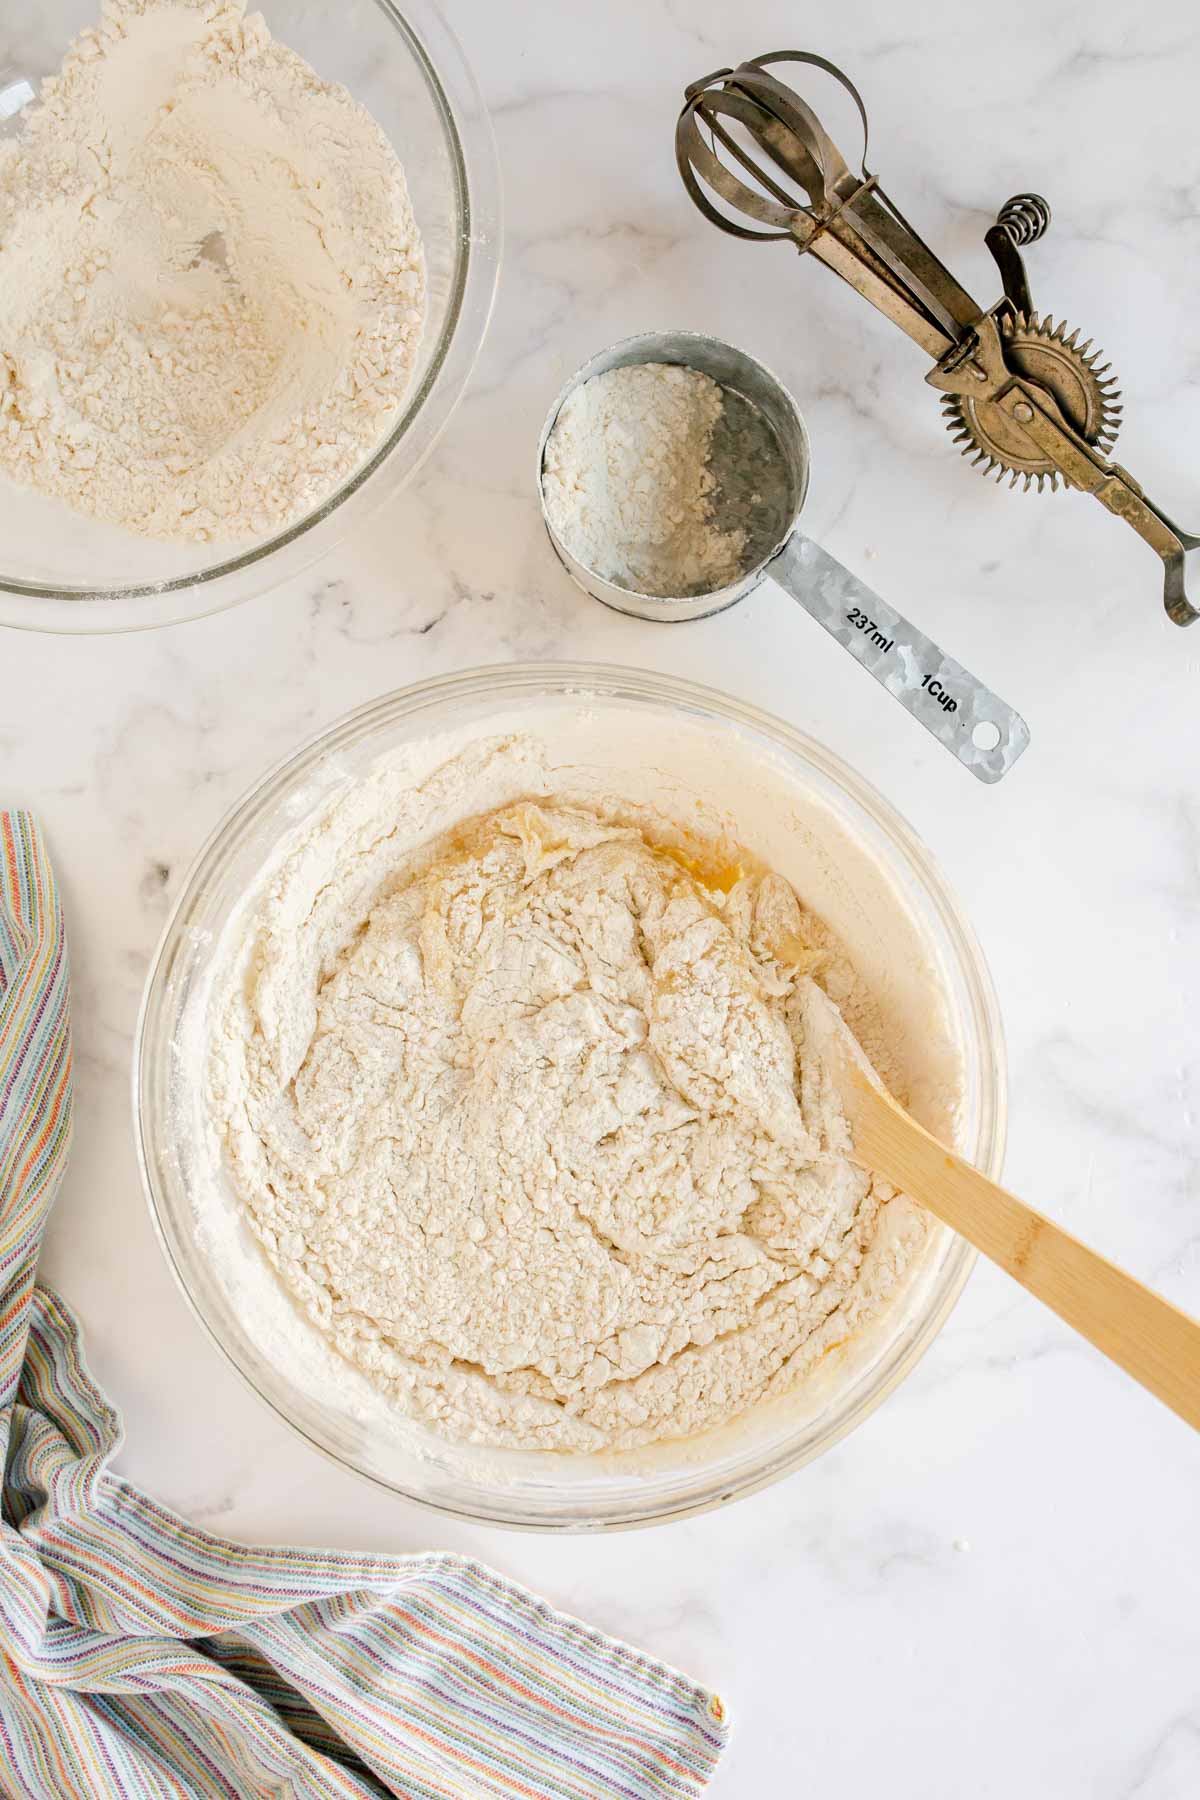 Flour in a bowl with a wooden spoon